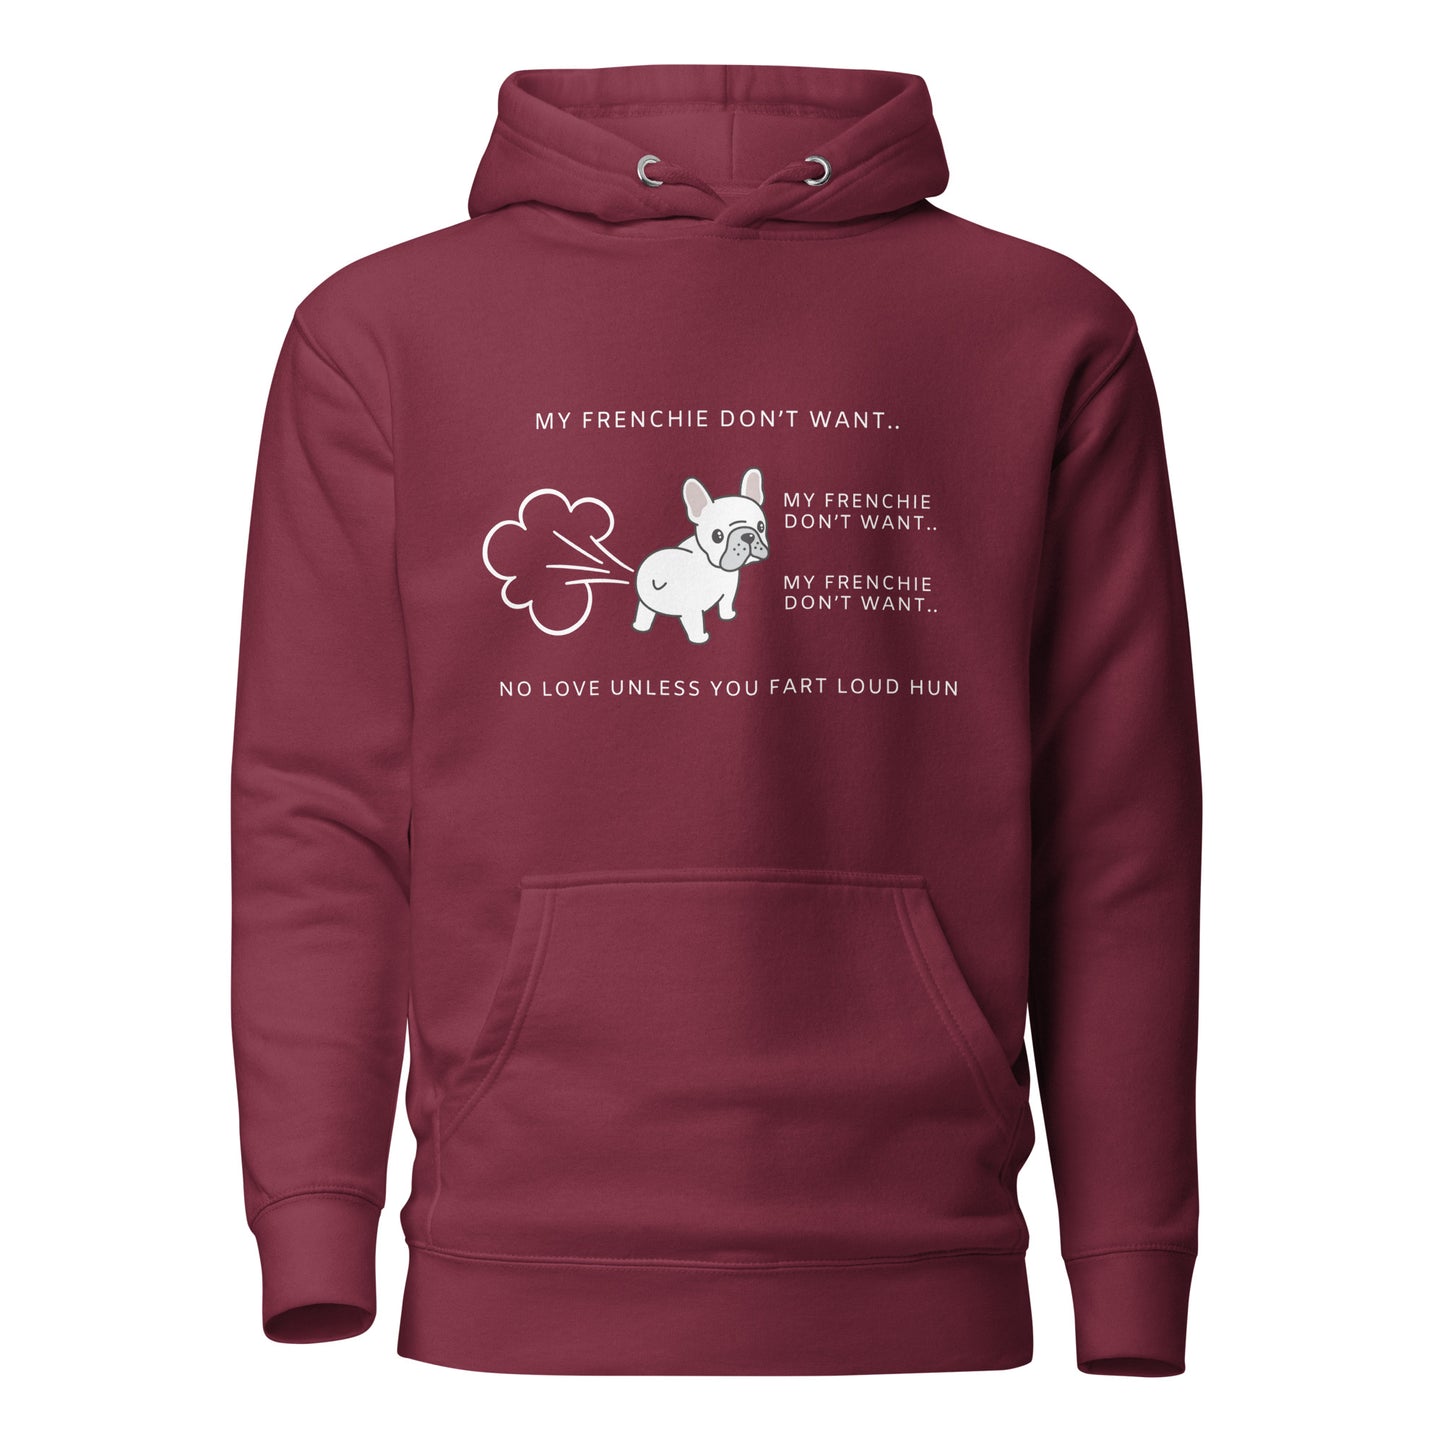 My Frenchie Don't Want Unisex Hoodie